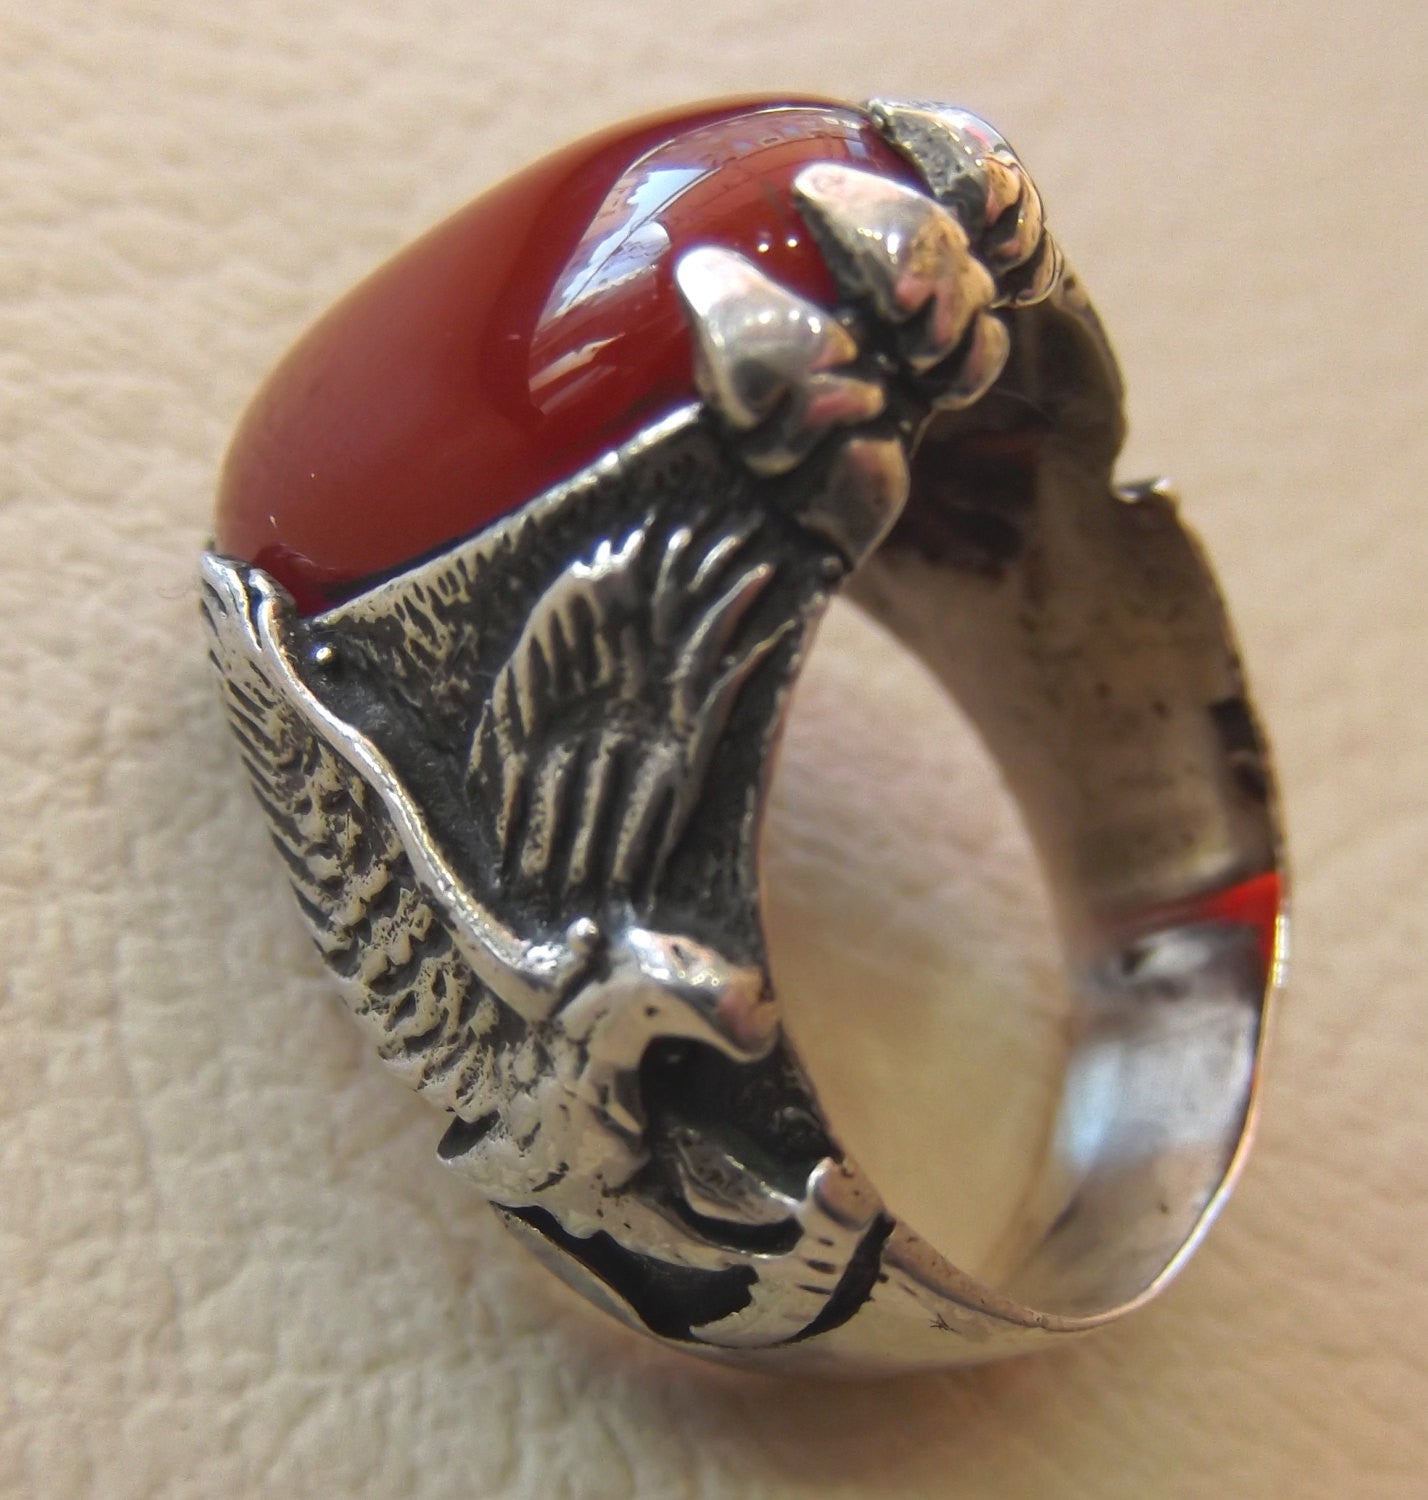 carnelian liver agate yamani aqeeq semi precious natural red stone man eagle ring sterling silver 925 oxidized jewelry any size fast ship